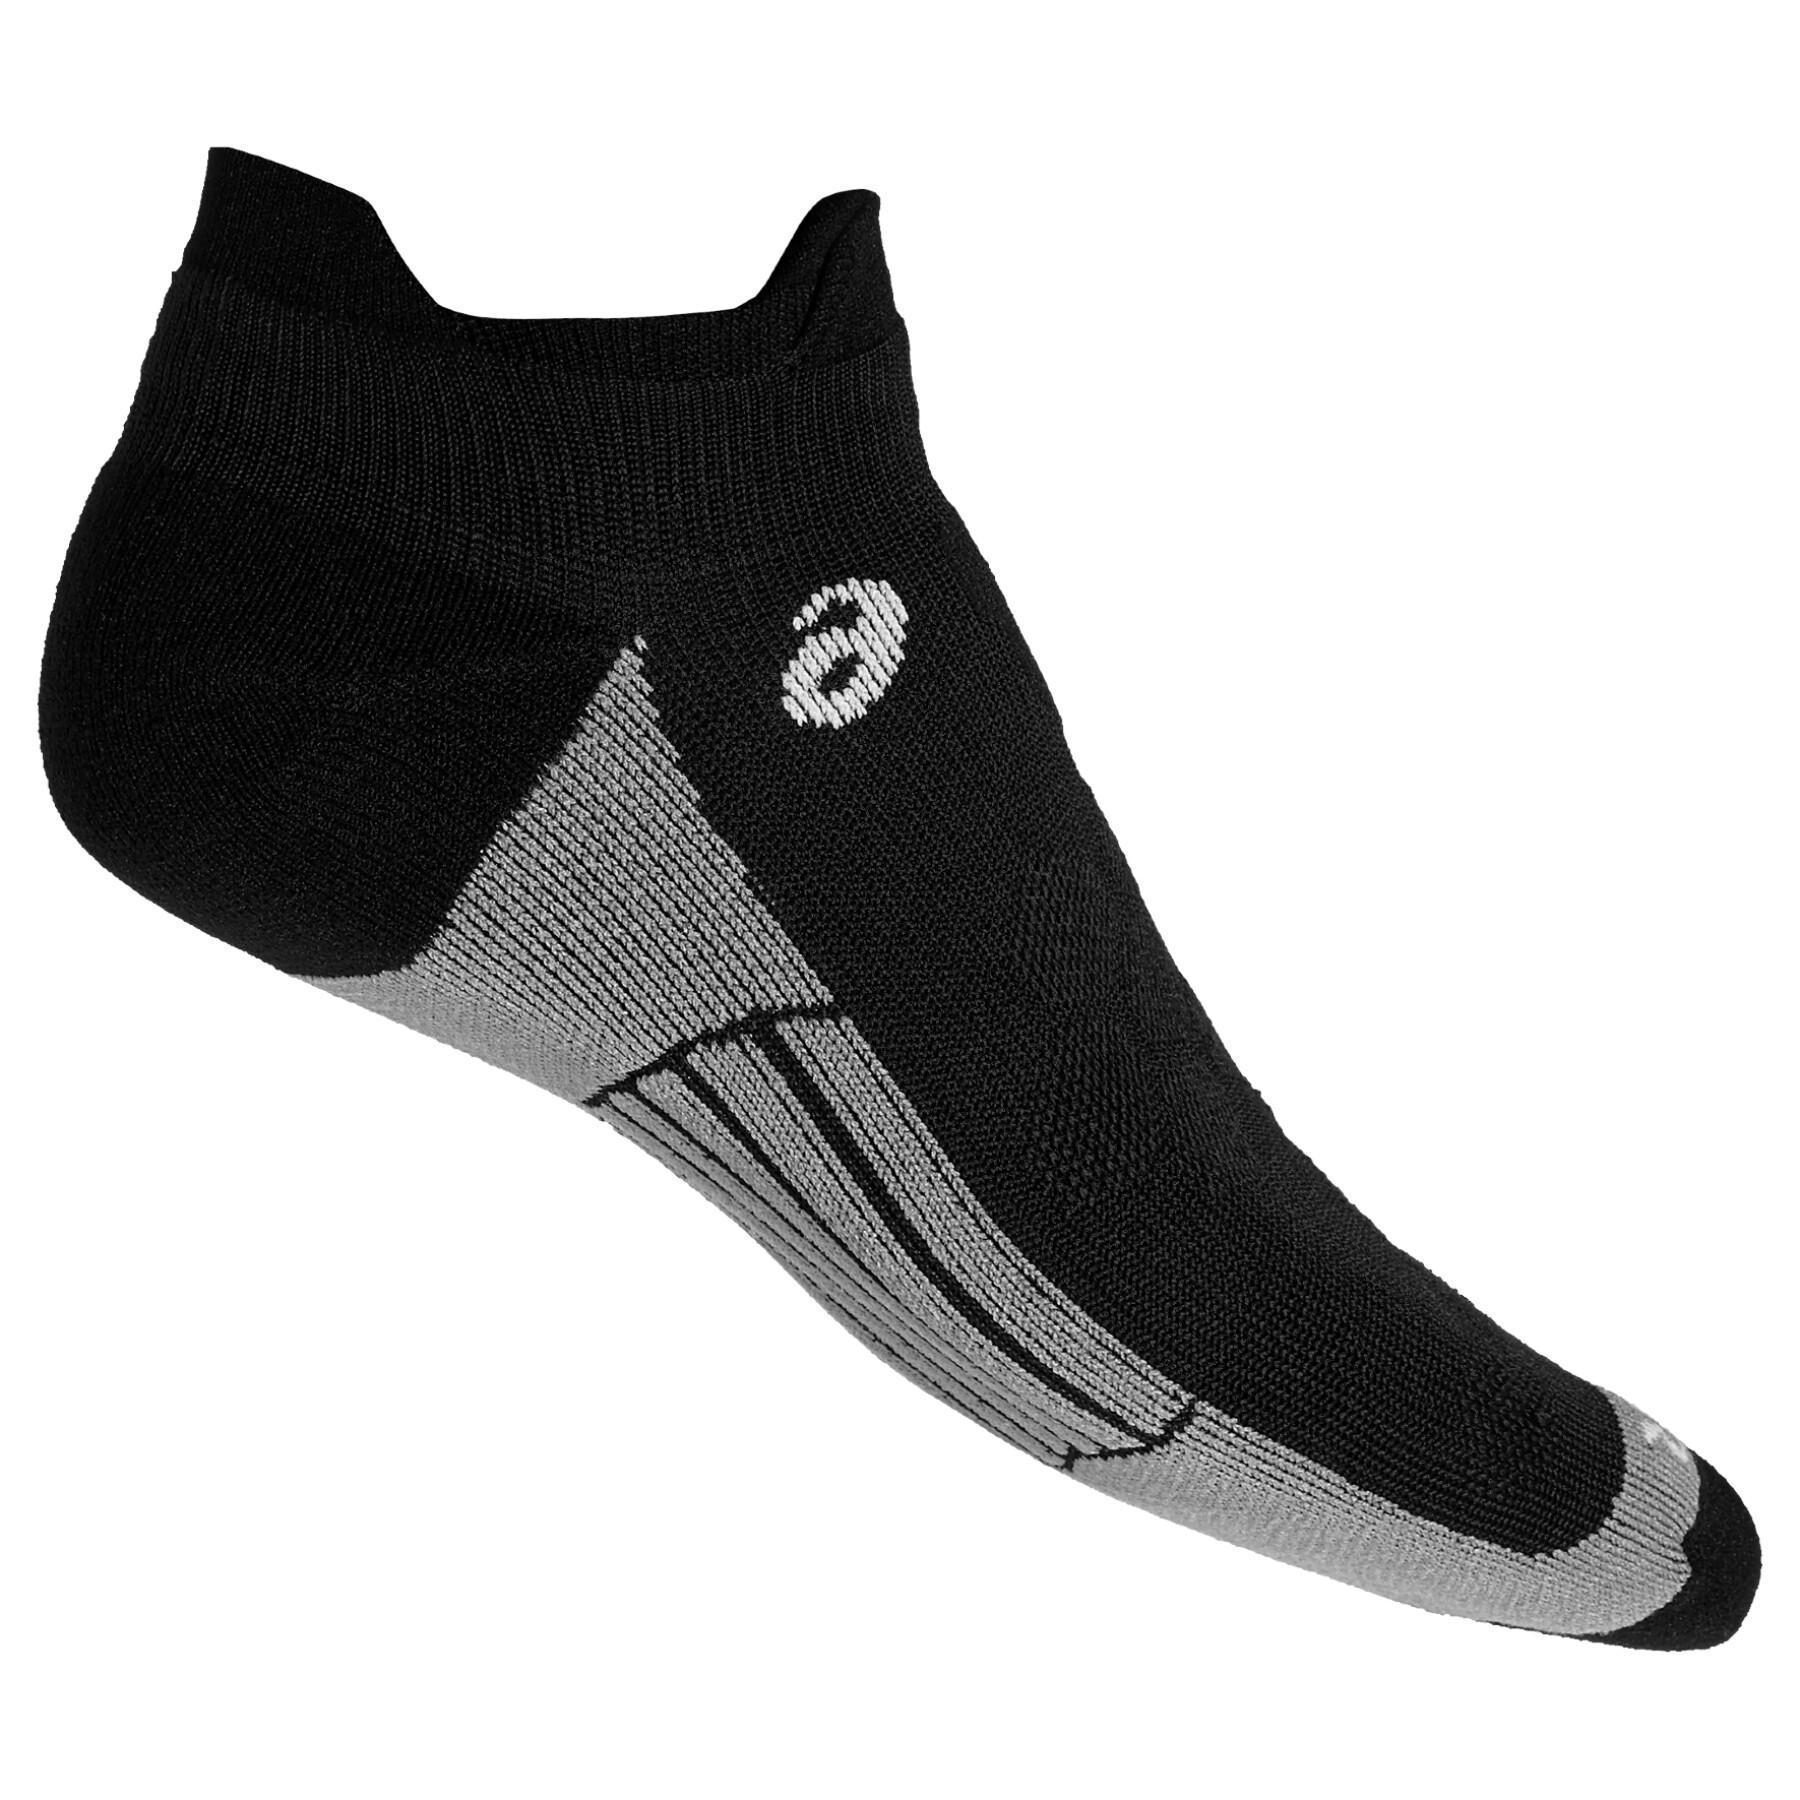 Chaussettes Asics Road ped double tab